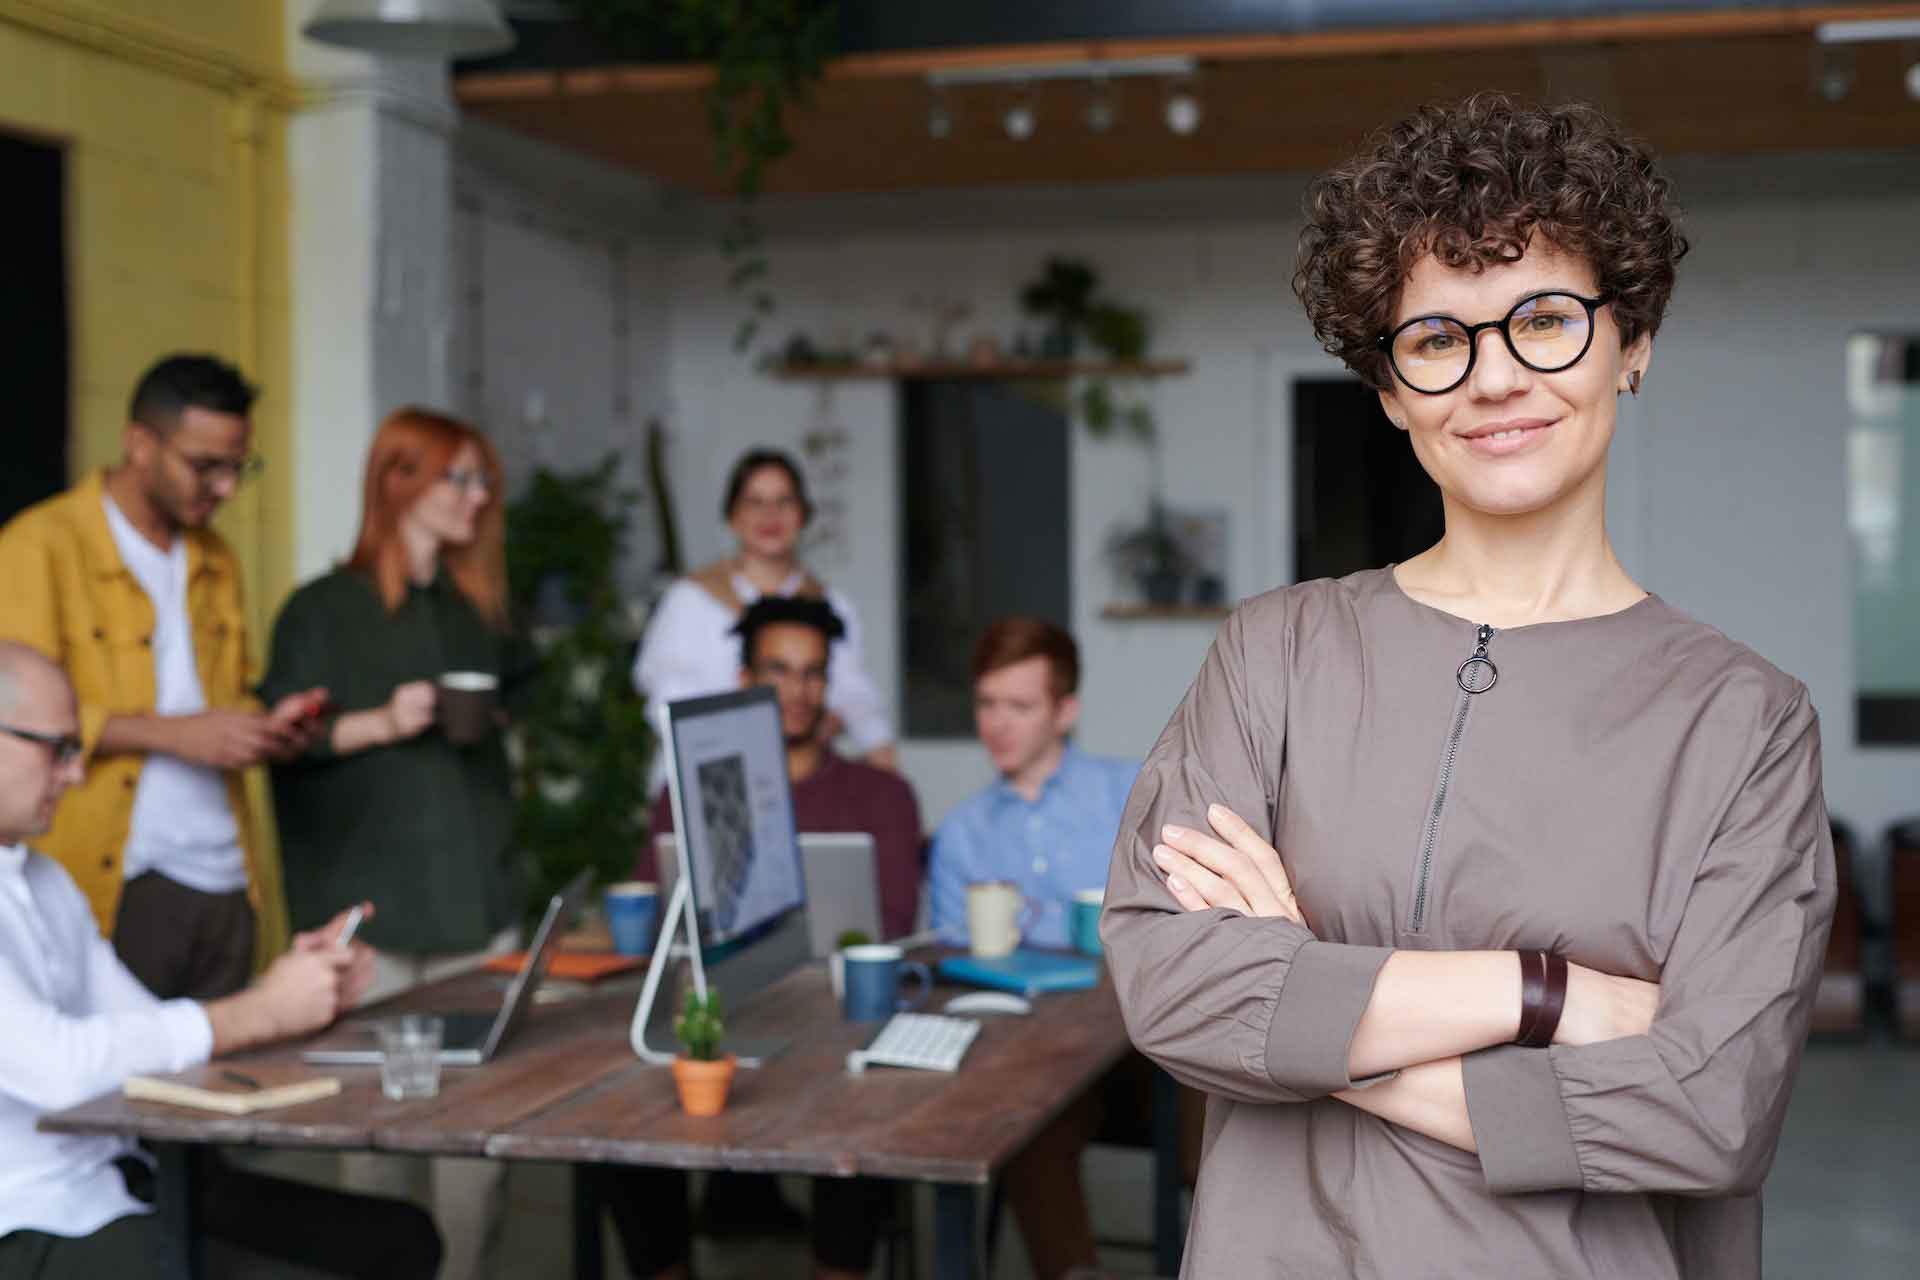 green business owner smiling with a group of people behind her